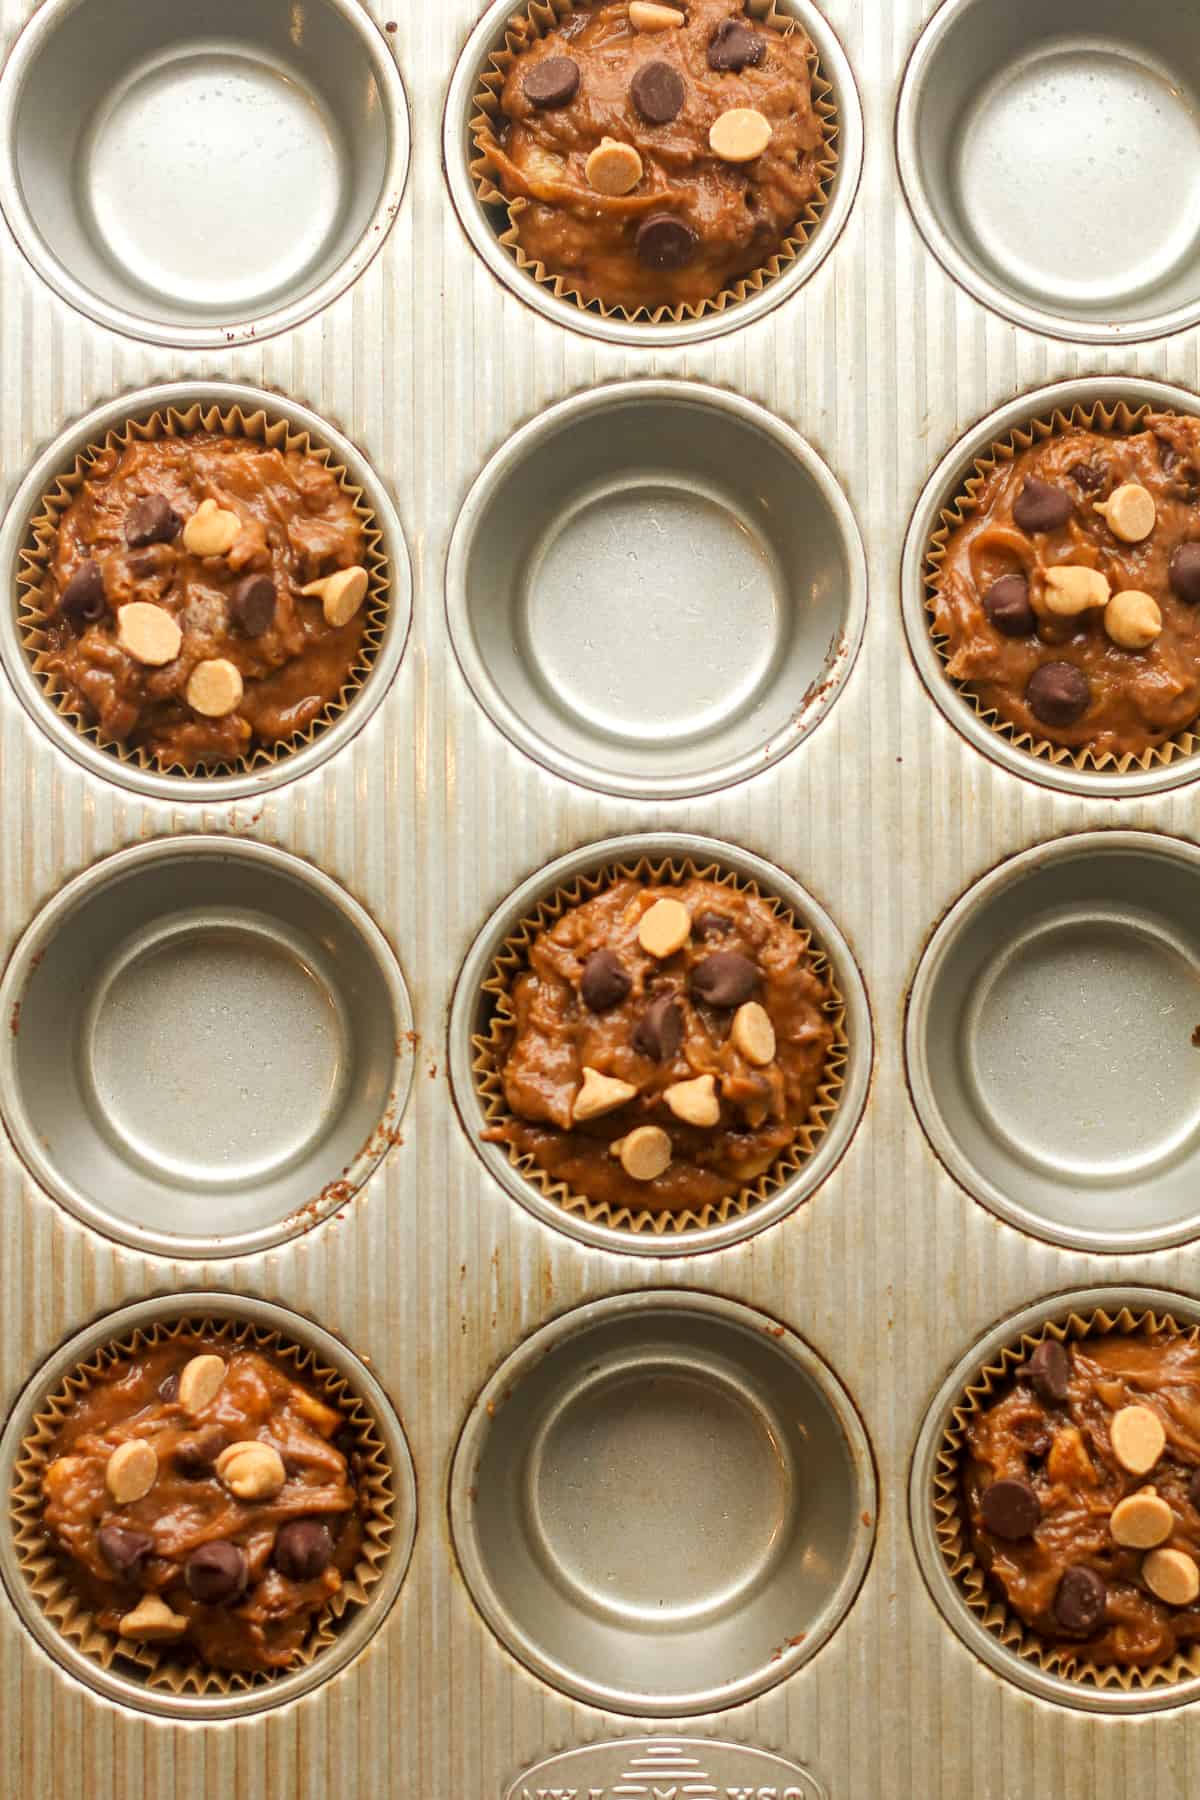 The 12-cup muffin tin with half of them full of muffin batter.